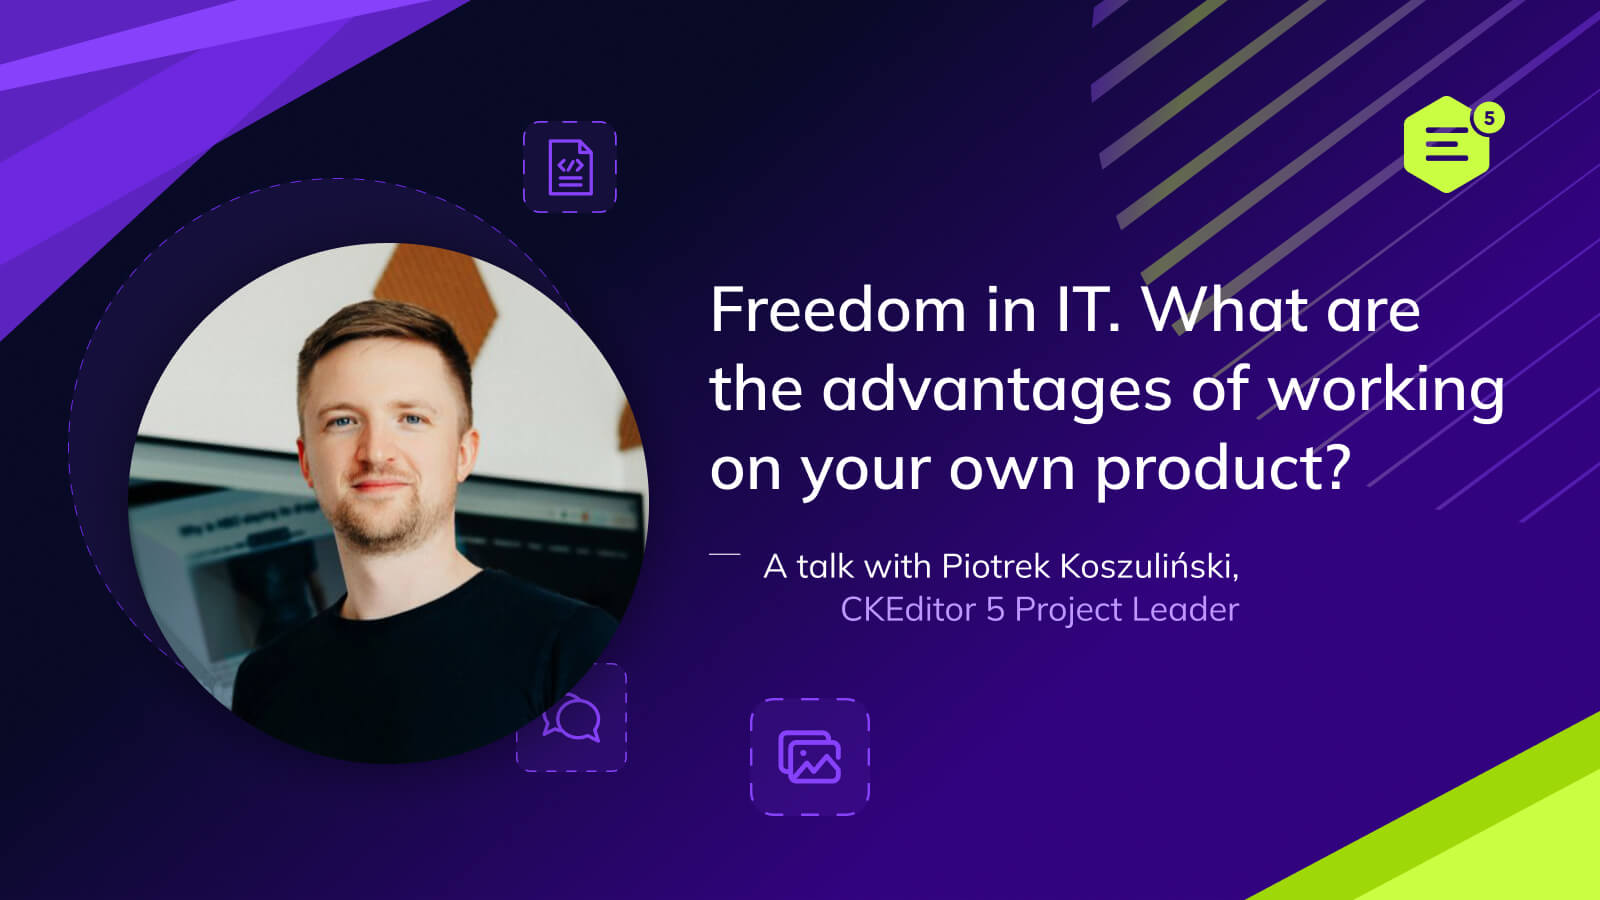 Piotrek Koszuliński, the leader of the team behind the creation of CKEditor 5. In his daily work, he focuses on software architecture and team development.